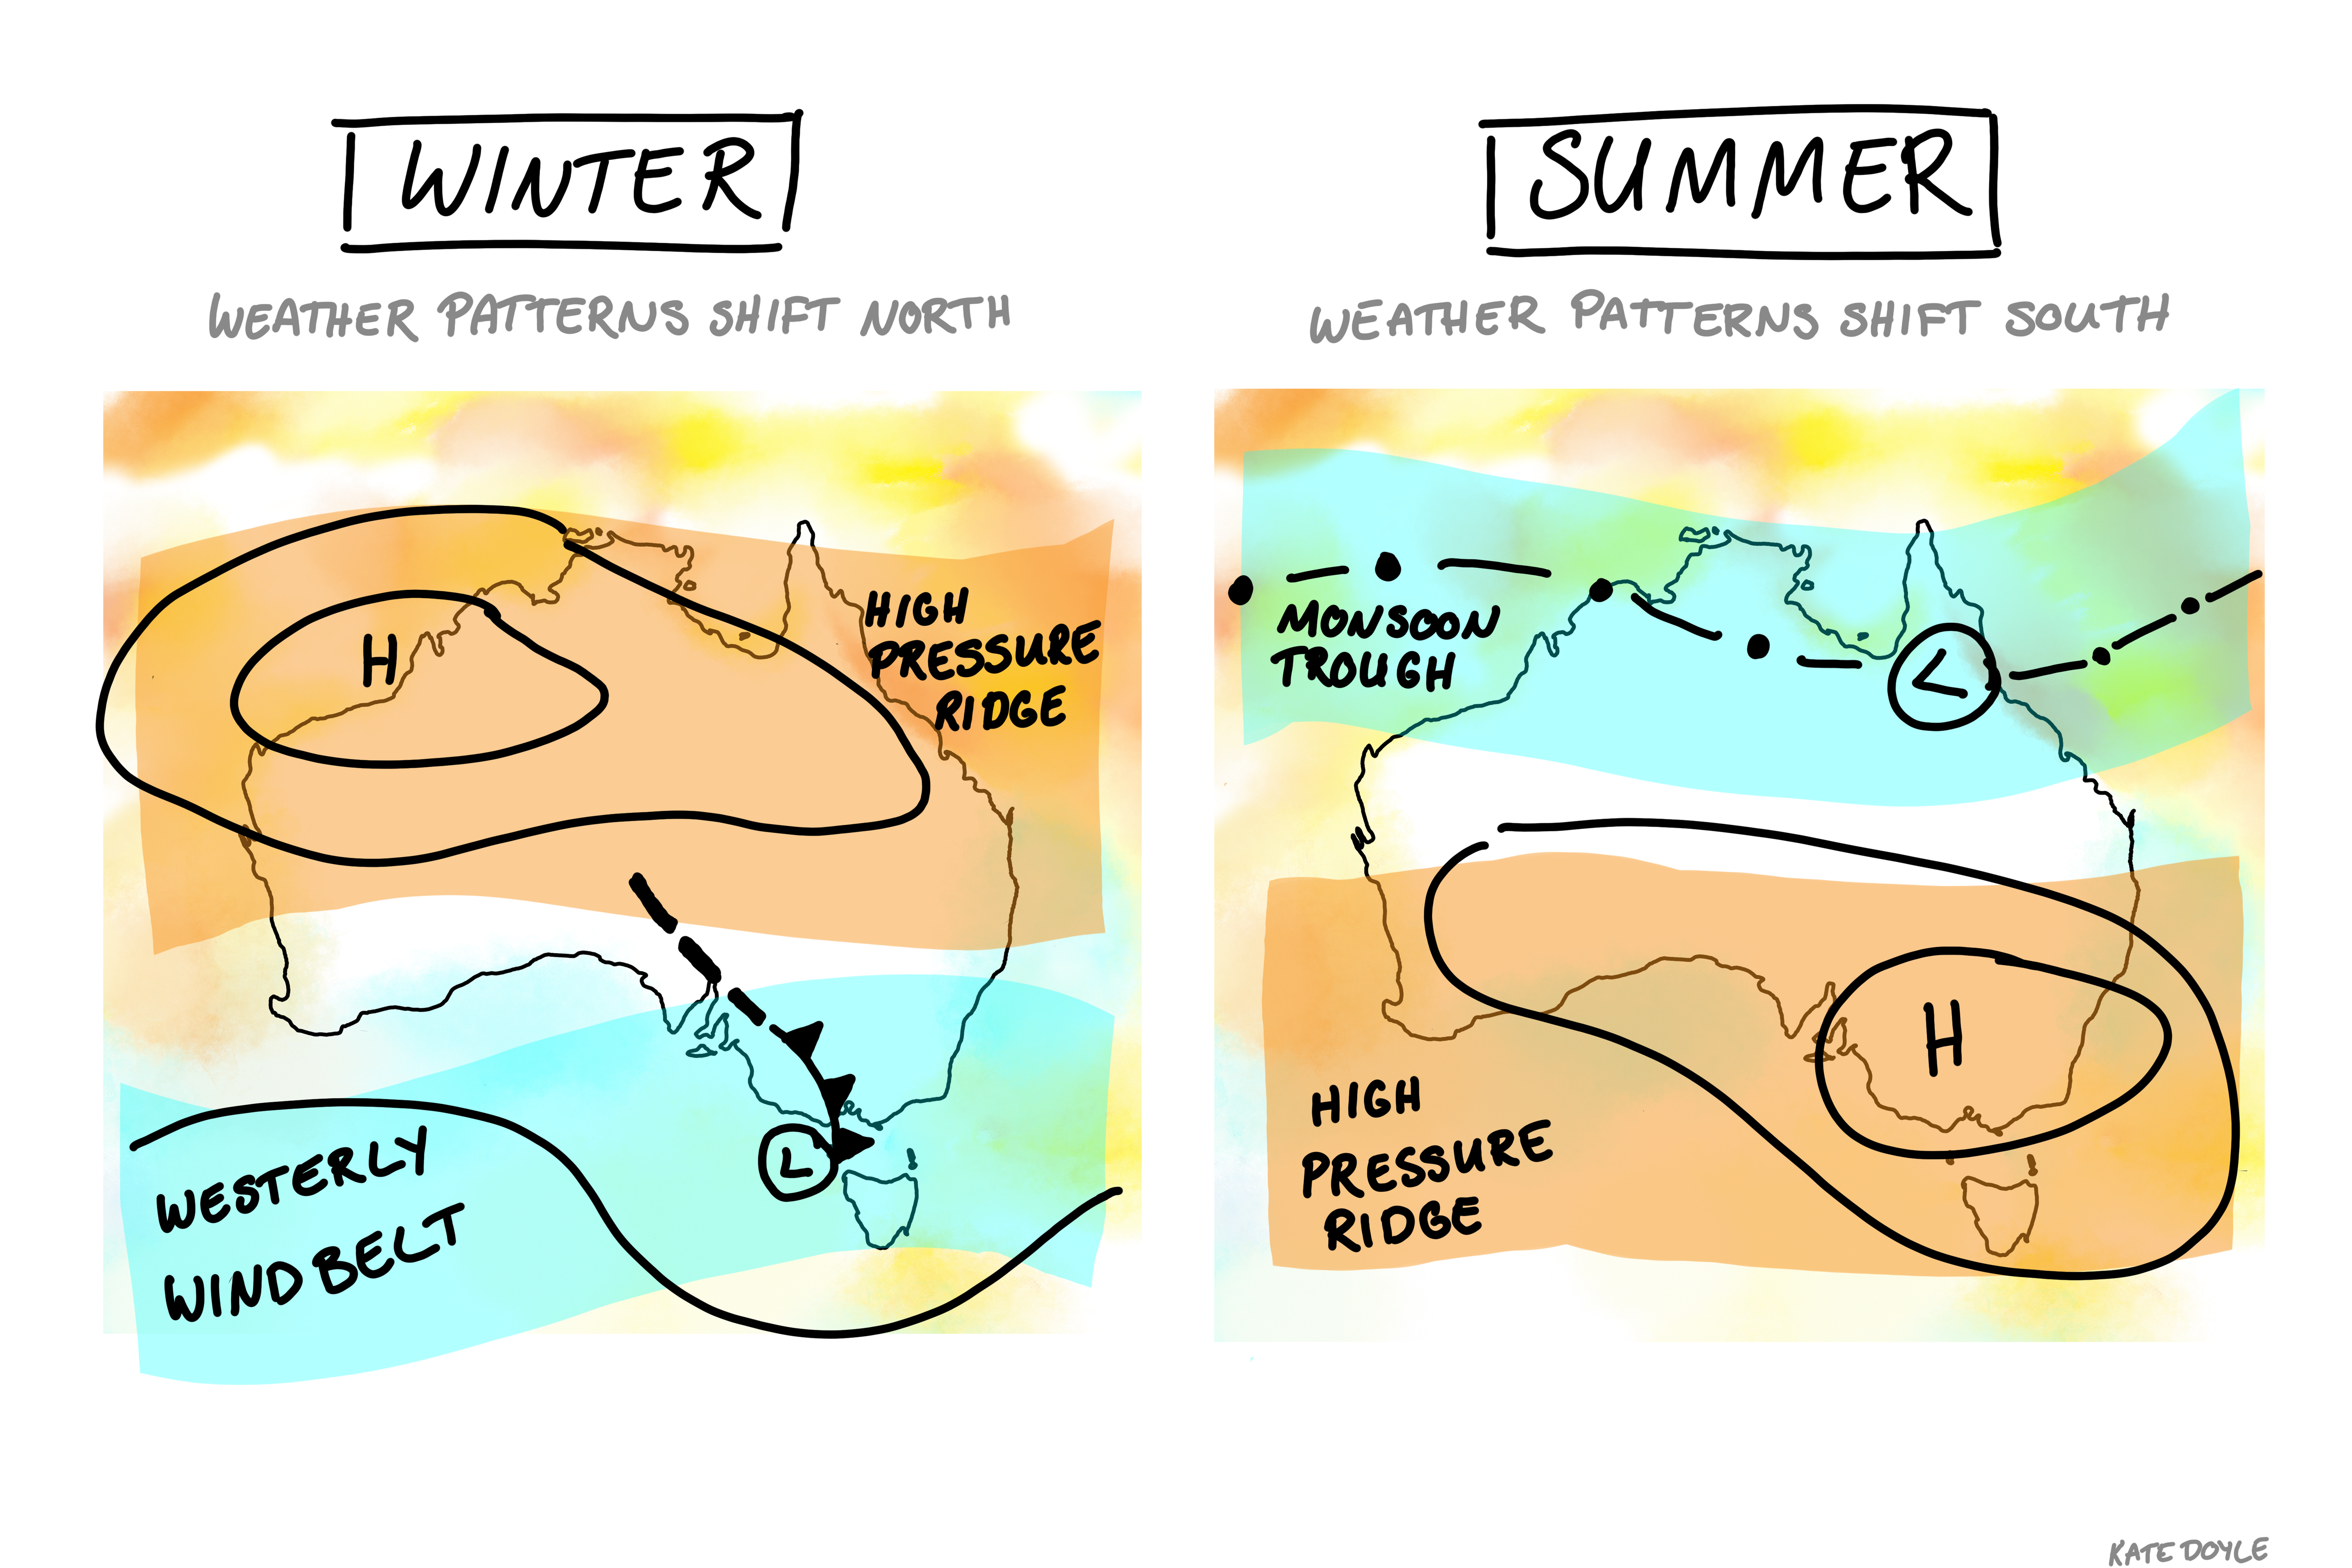 WINTER: high over northern AUS, westerly wind belt over south. SUMMER: High over southern AUS Monsoon over north